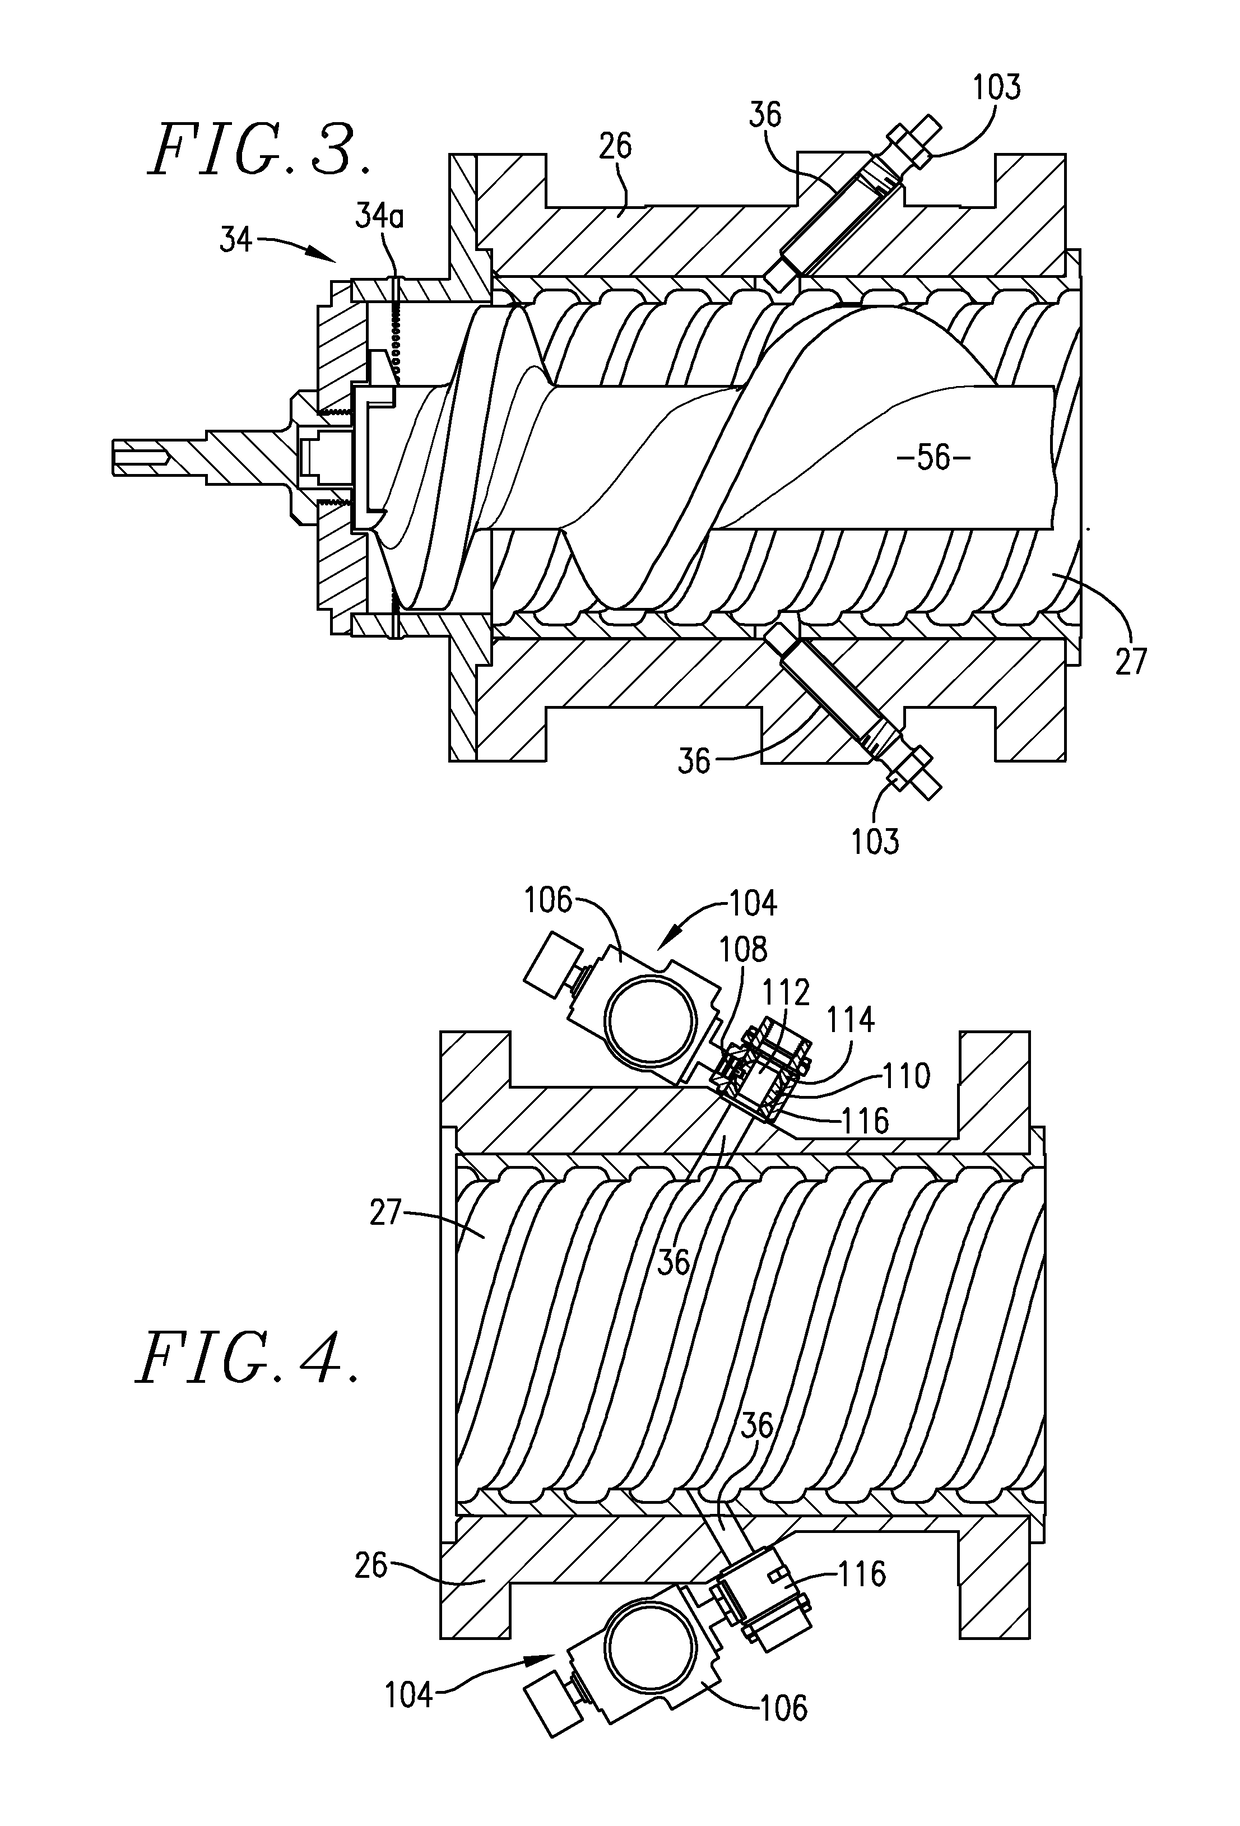 Method and apparatus for extrusion processing of high fiber content foods